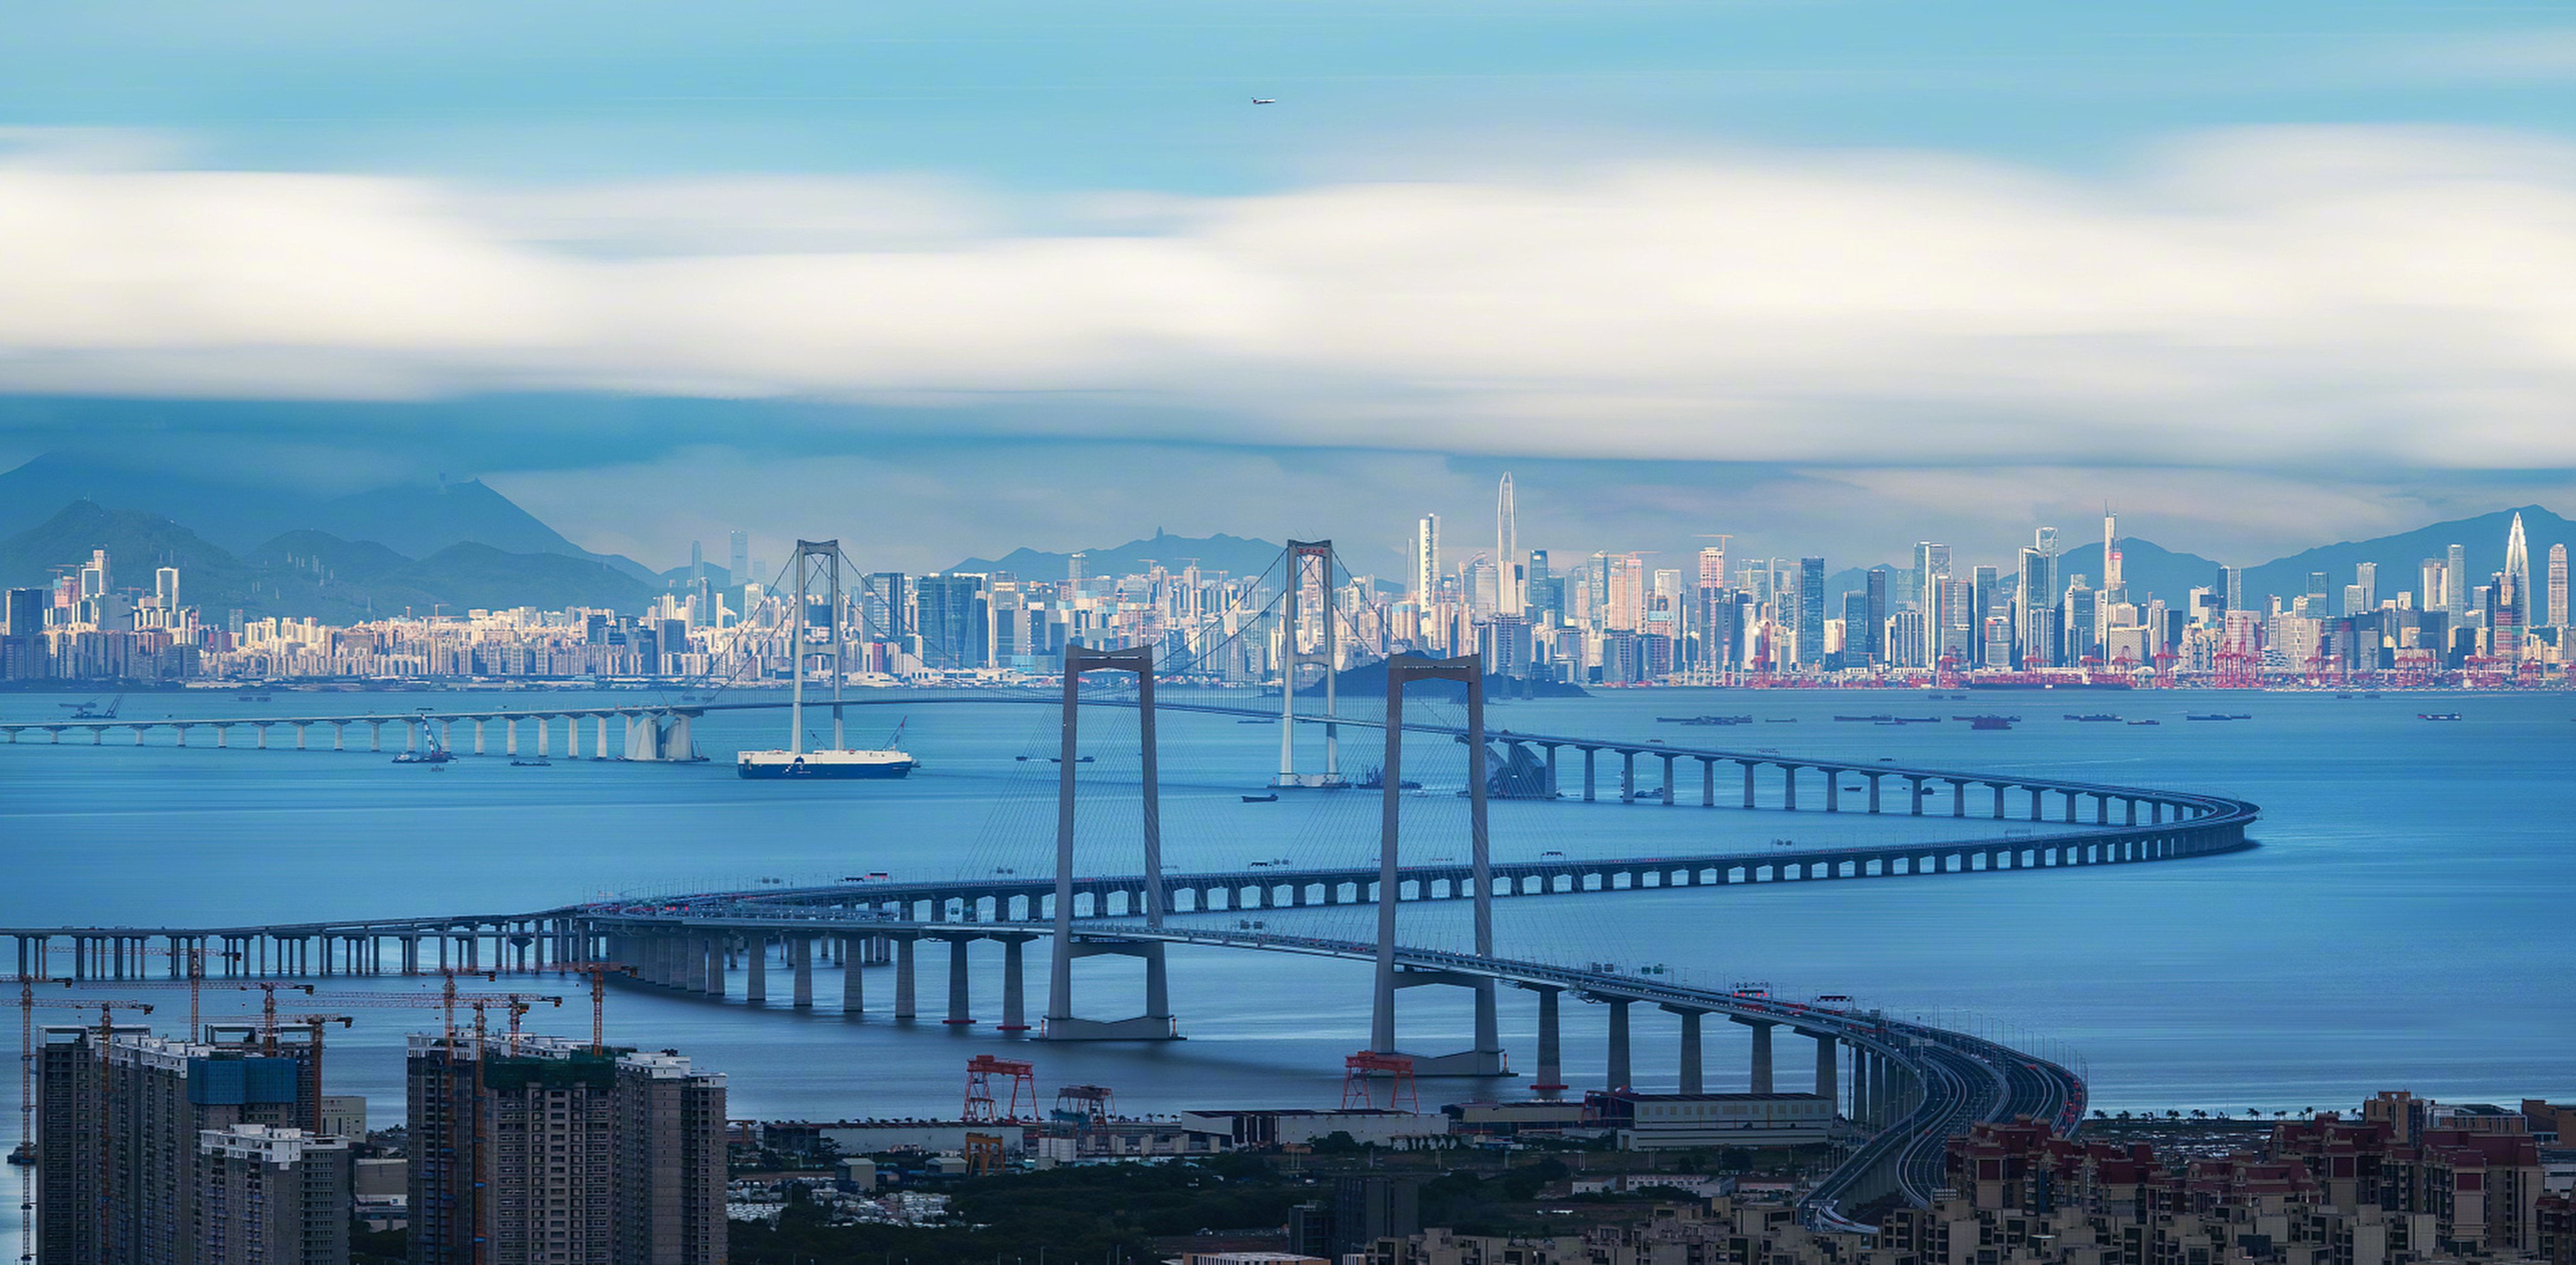 The 24km-long crossing will connect the two sides of the Pearl River Delta within the mainland. Photo: People’s Daily